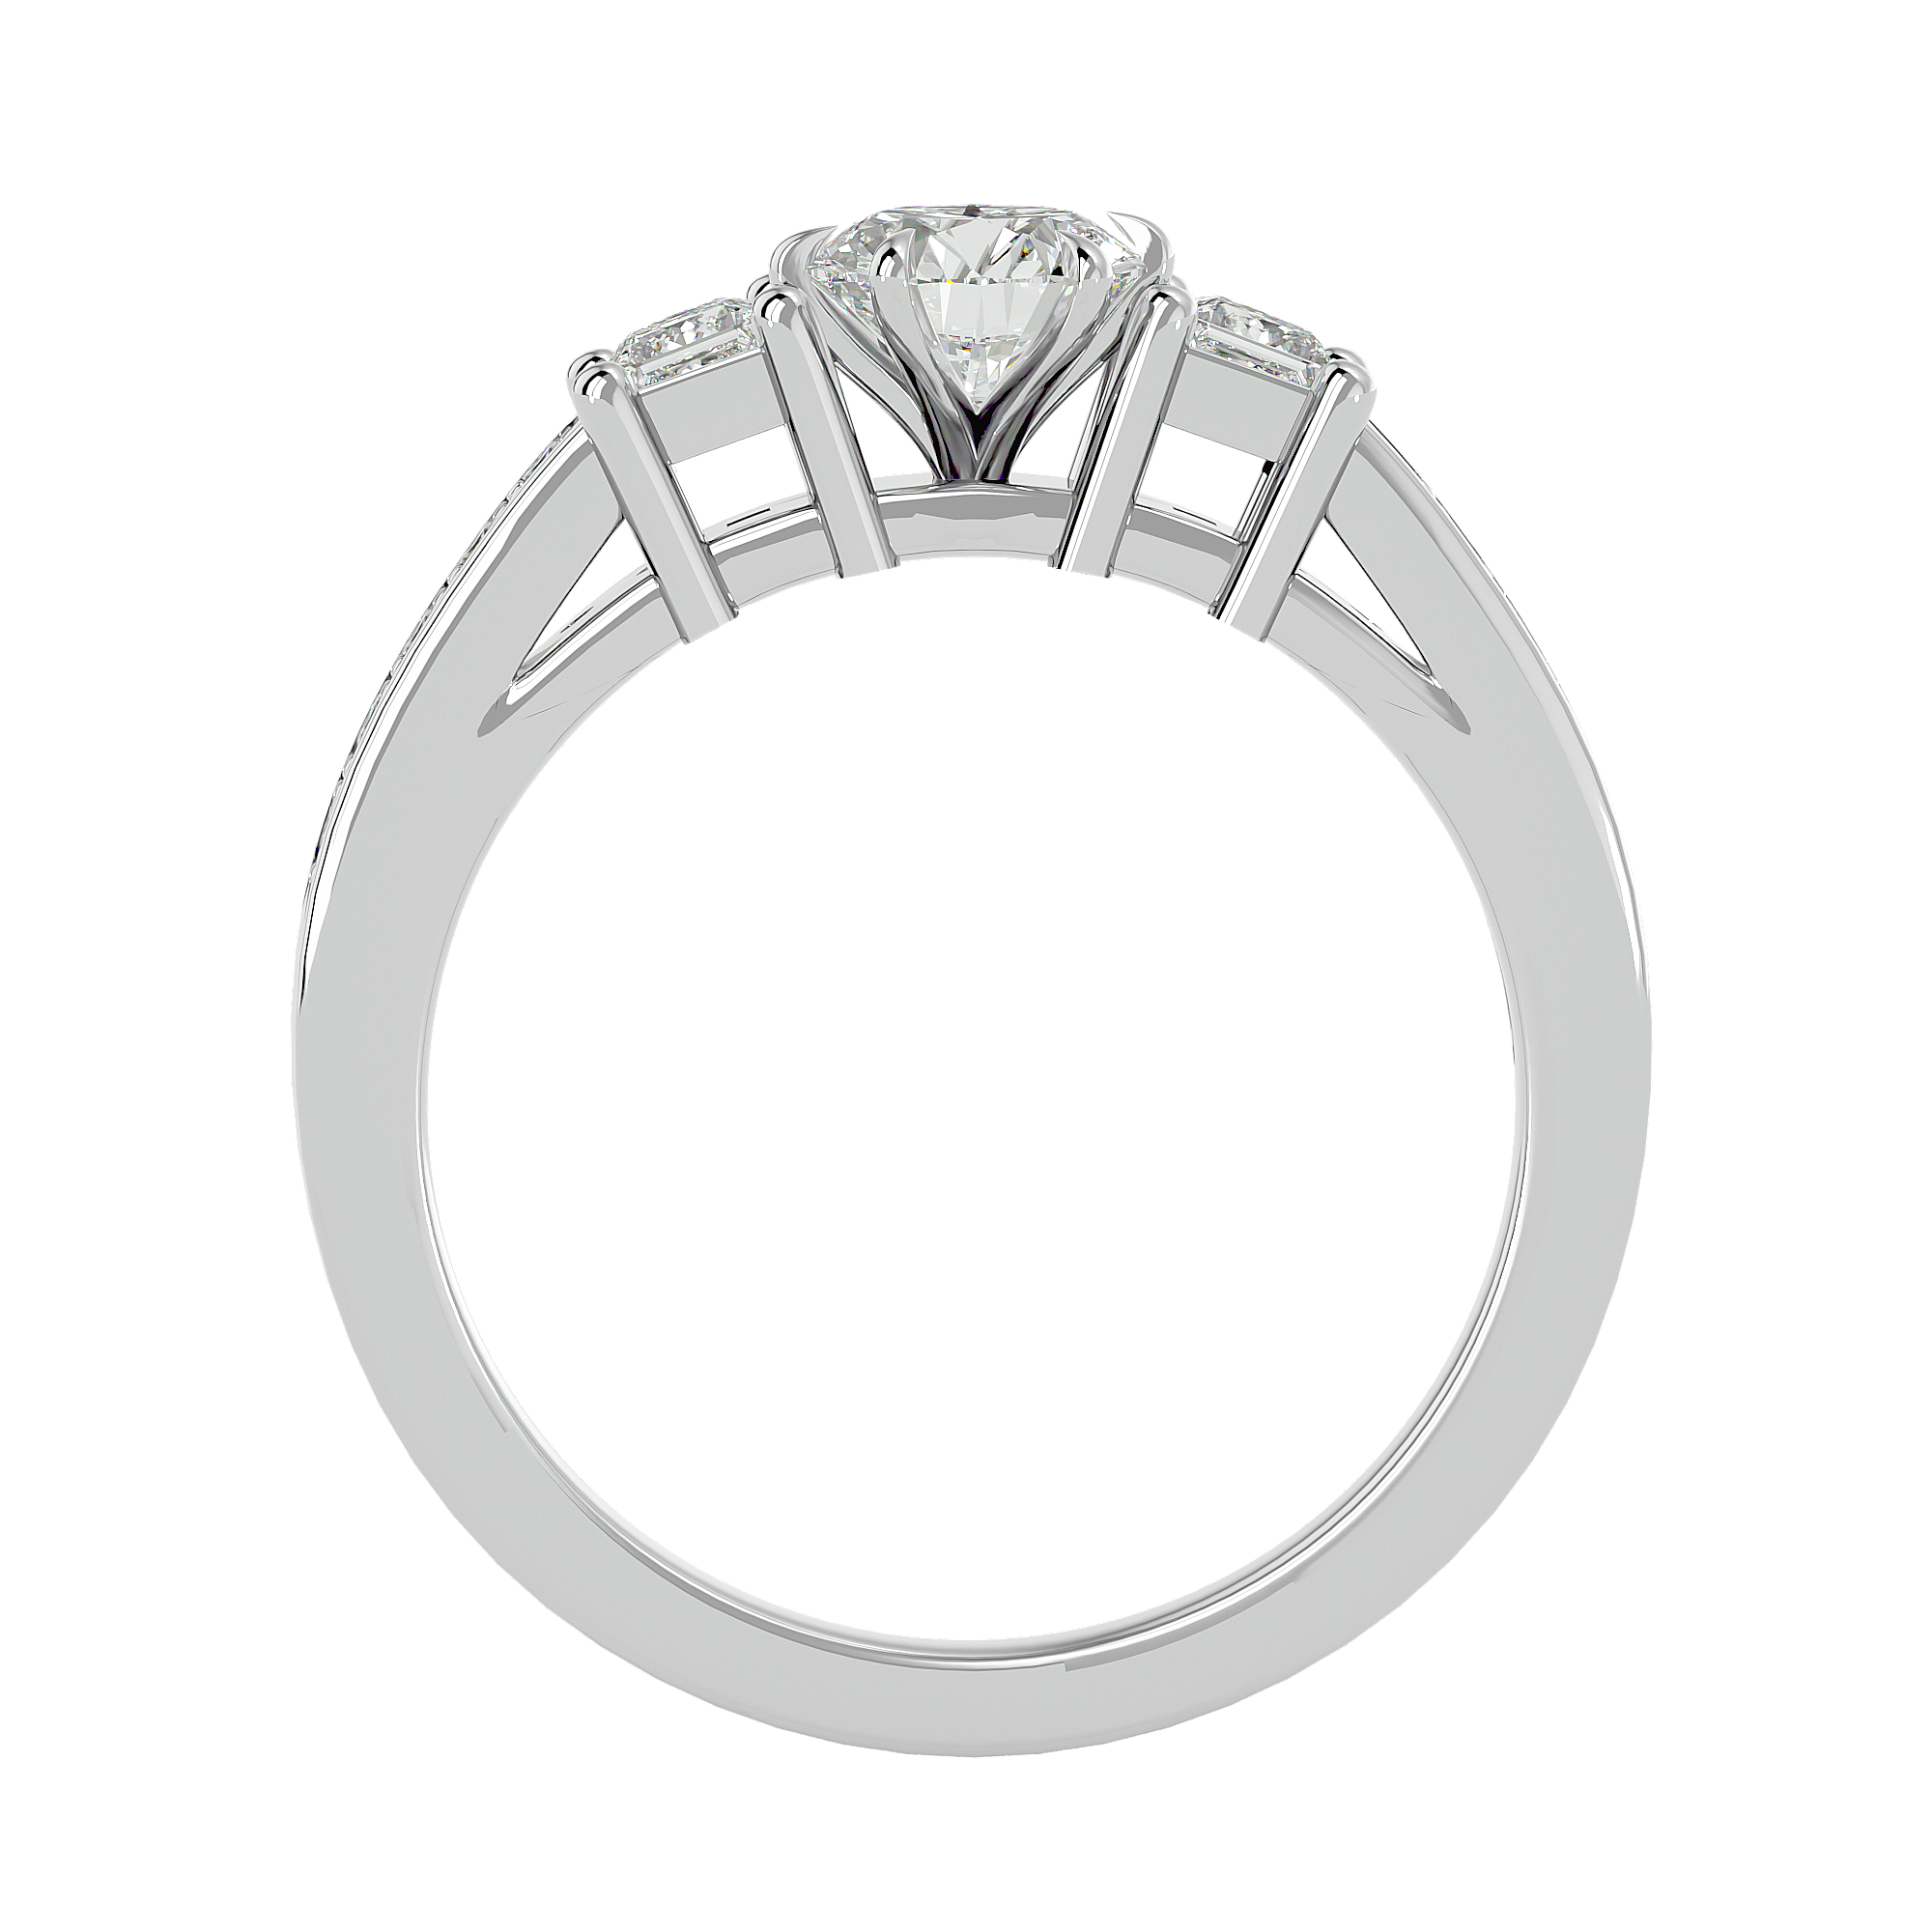 Ionian Solitaire Lab Grown Diamond Ring